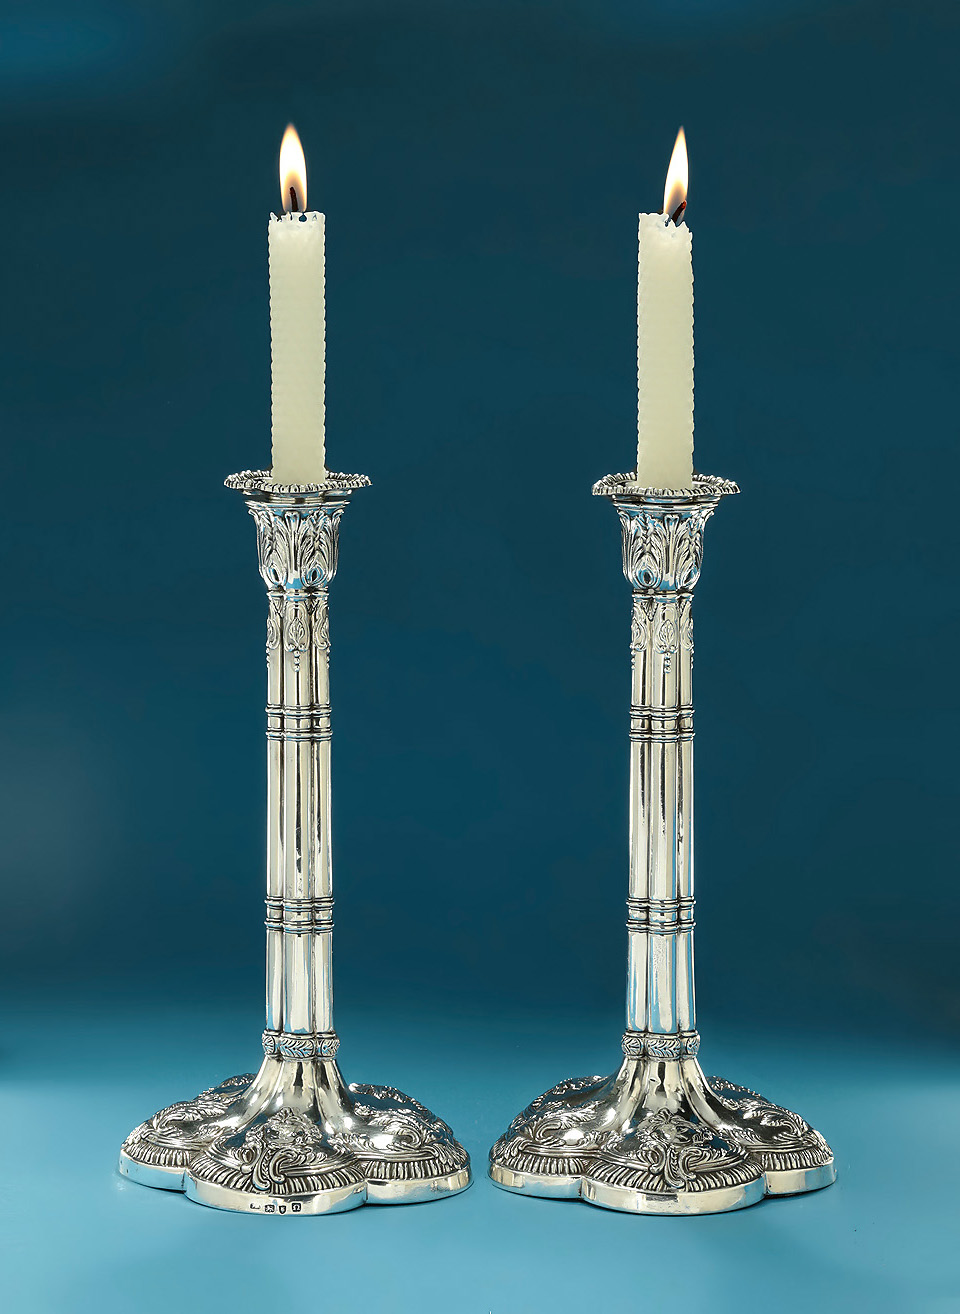 Pair Early George III Silver Clustered-Column Candlesticks, William Cafe, London 1768, Crest & Motto, Dukes of Gordon, Letterfourie 